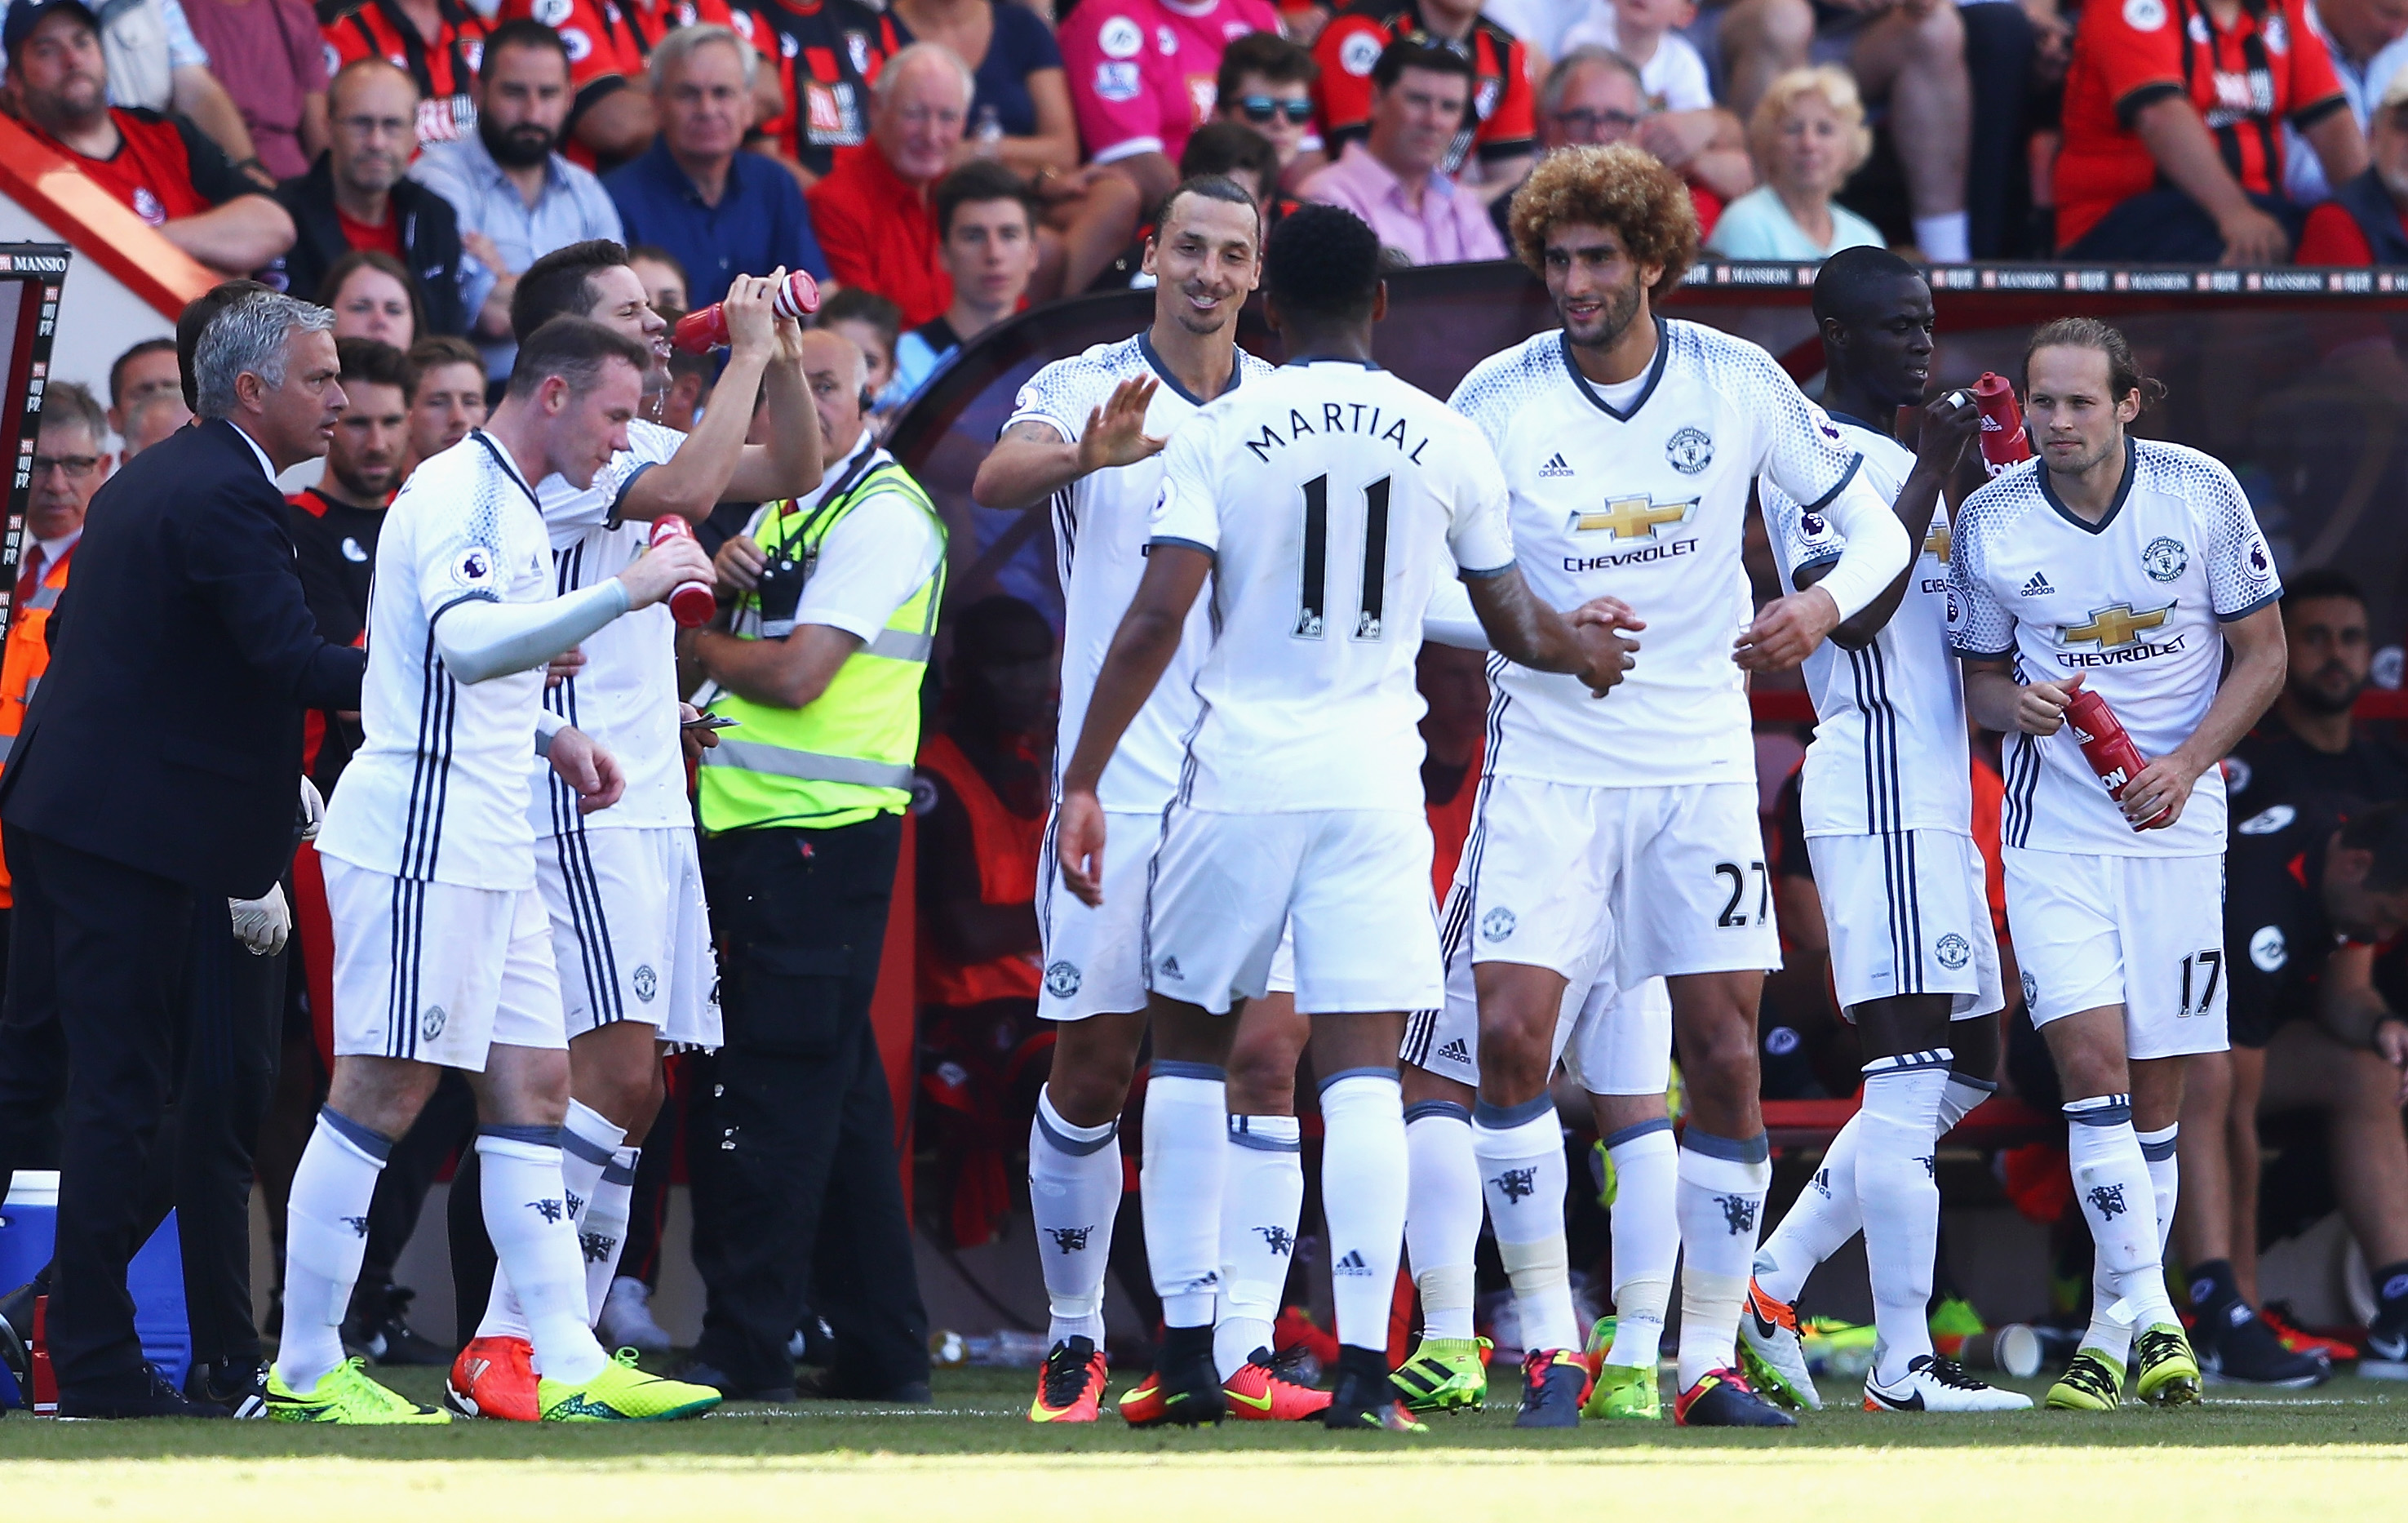 BOURNEMOUTH, ENGLAND - AUGUST 14:  Zlatan Ibrahimovic of Manchester United celebrates scoring his team's third goal with team mates and manager Jose Mourinho during the Premier League match between AFC Bournemouth and Manchester United at Vitality Stadium on August 14, 2016 in Bournemouth, England.  (Photo by Michael Steele/Getty Images)